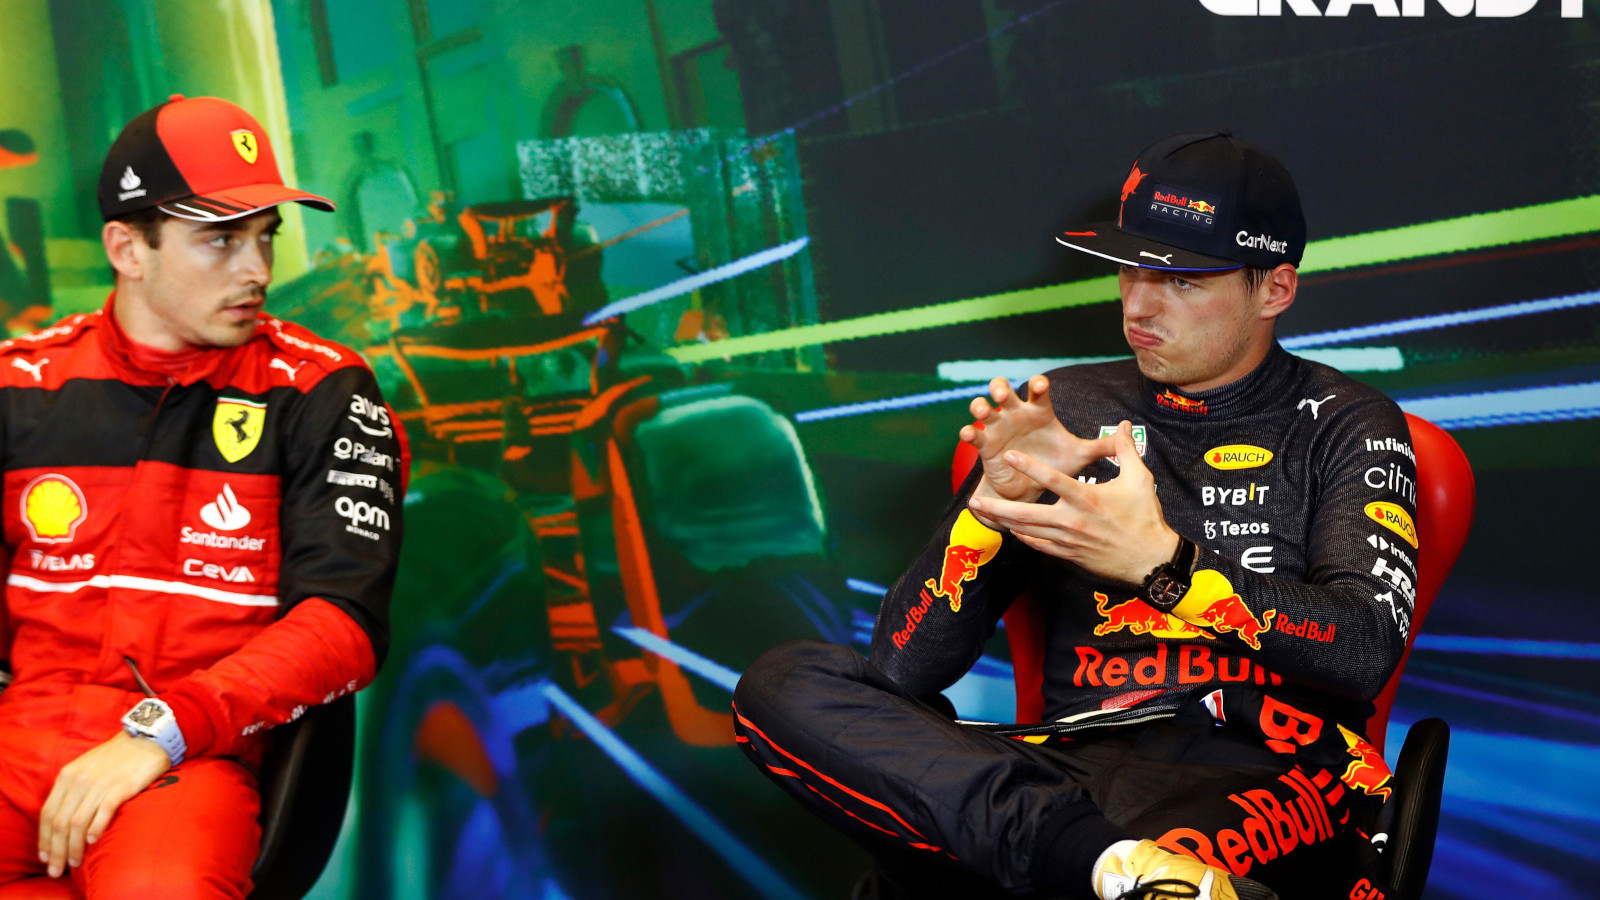 Max Verstappen explaining something to Charles Leclerc in the press conference. Baku June 2022